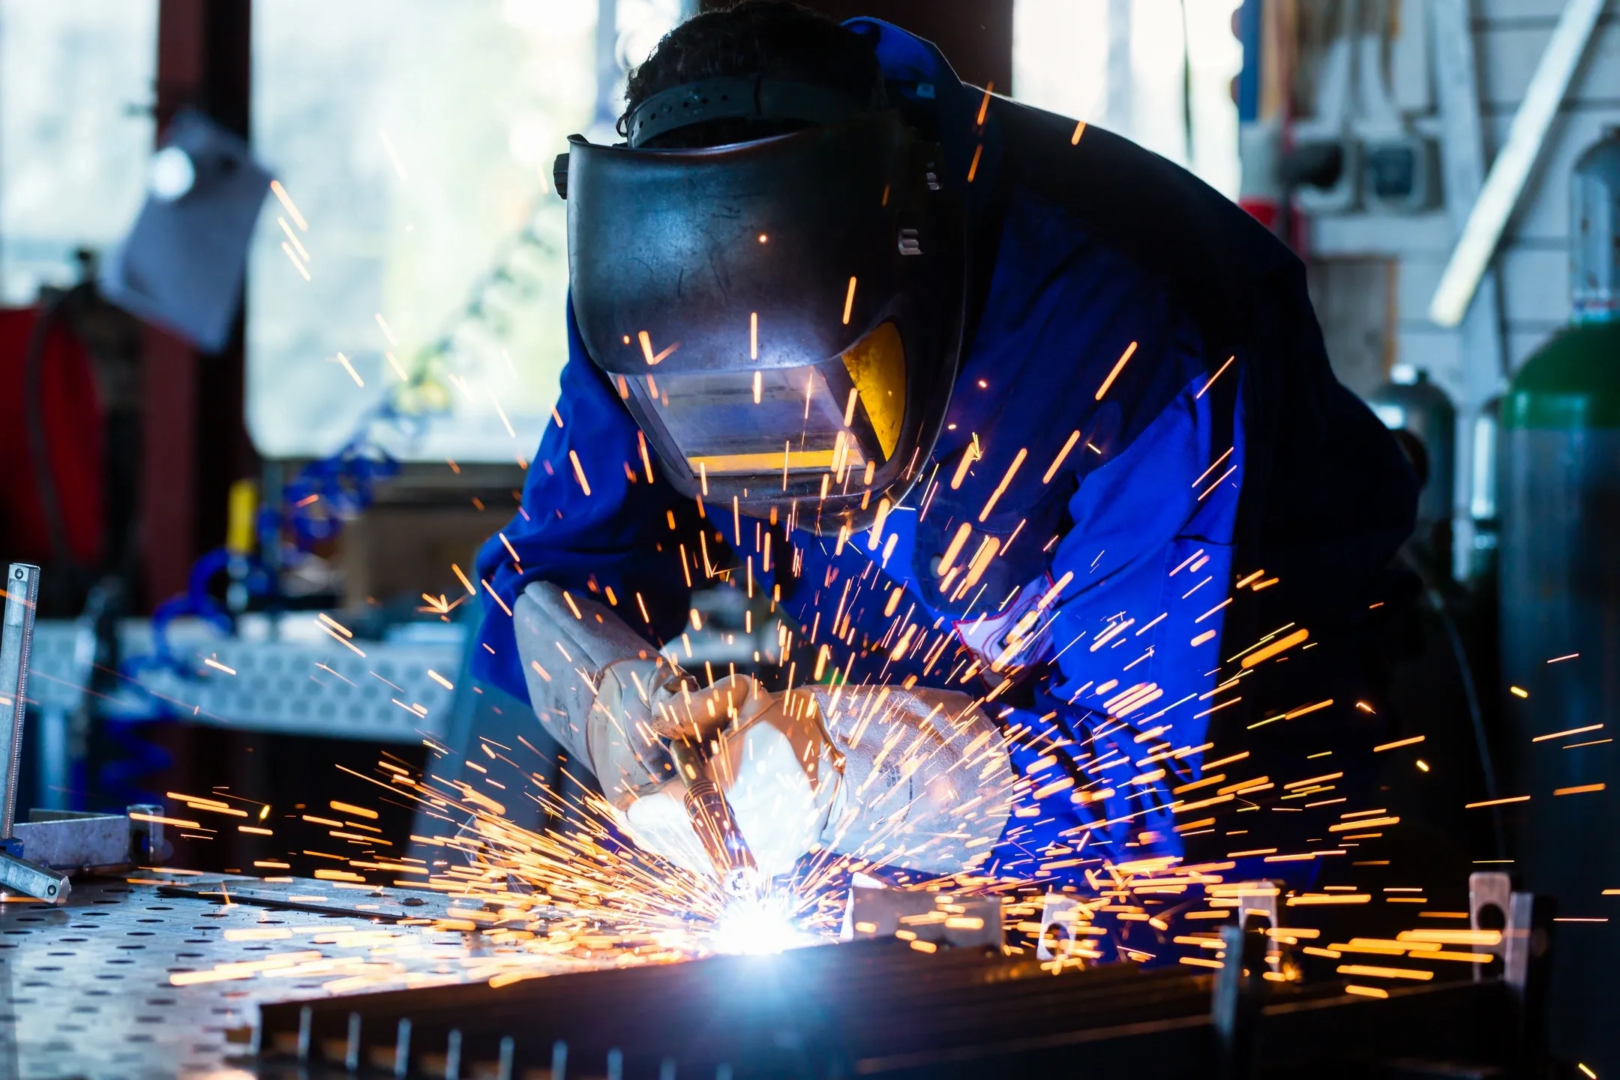 A person welding with sparks flying from the head.